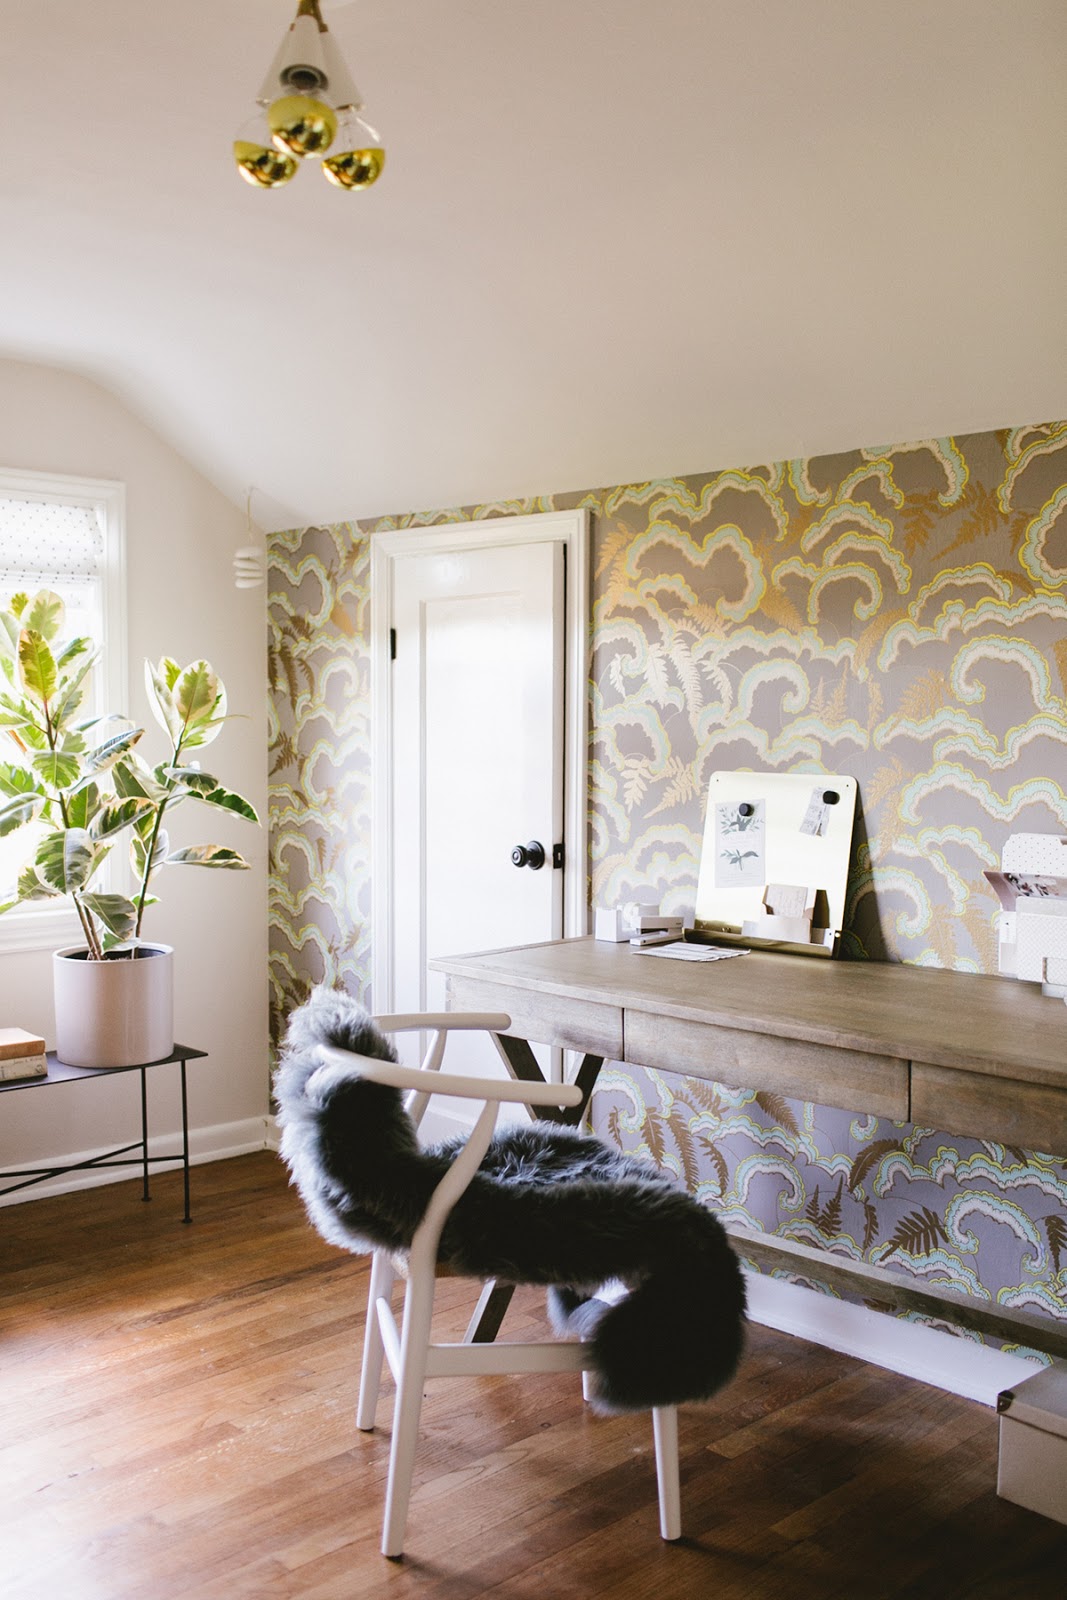 These Photos Will Make You Reconsider Wallpaper | Kayla Lynn